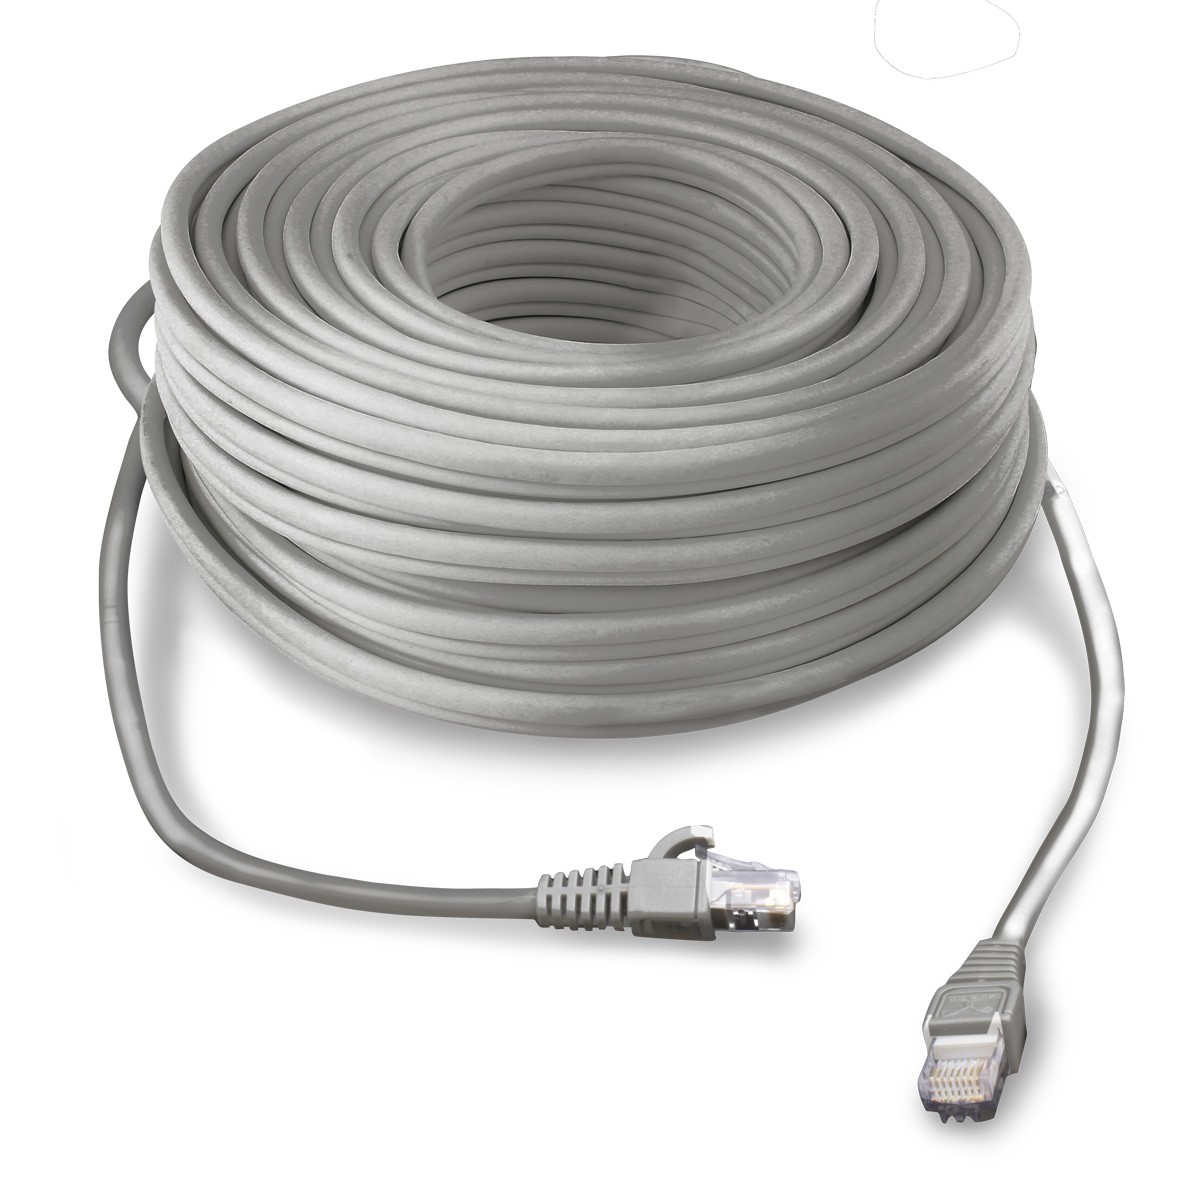 2m Cat5e LAN cable for Swann NVRs 